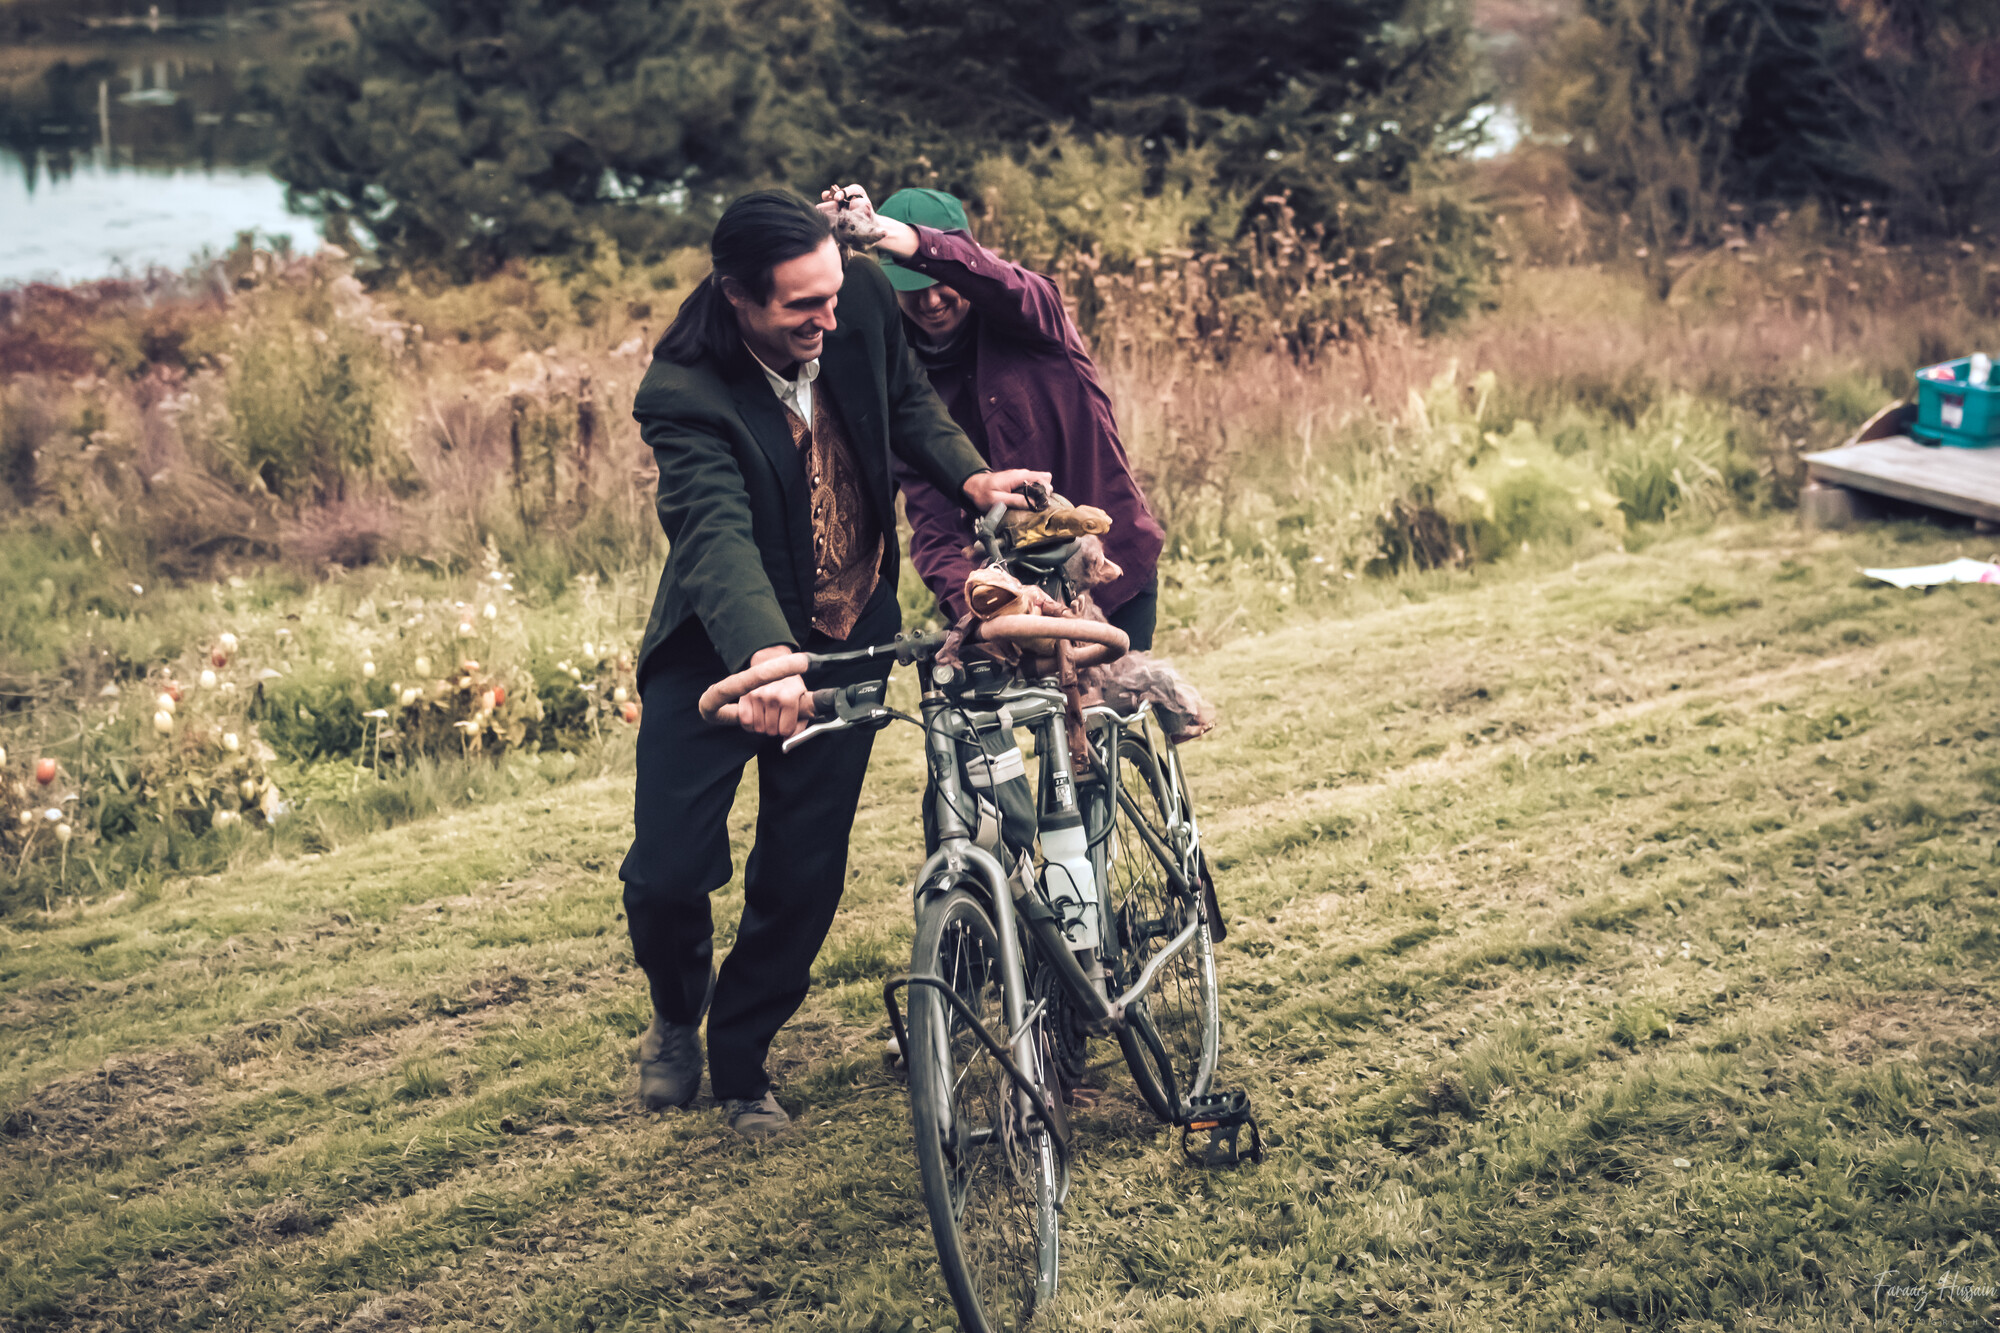 Two men pushing a bicycle through a field.